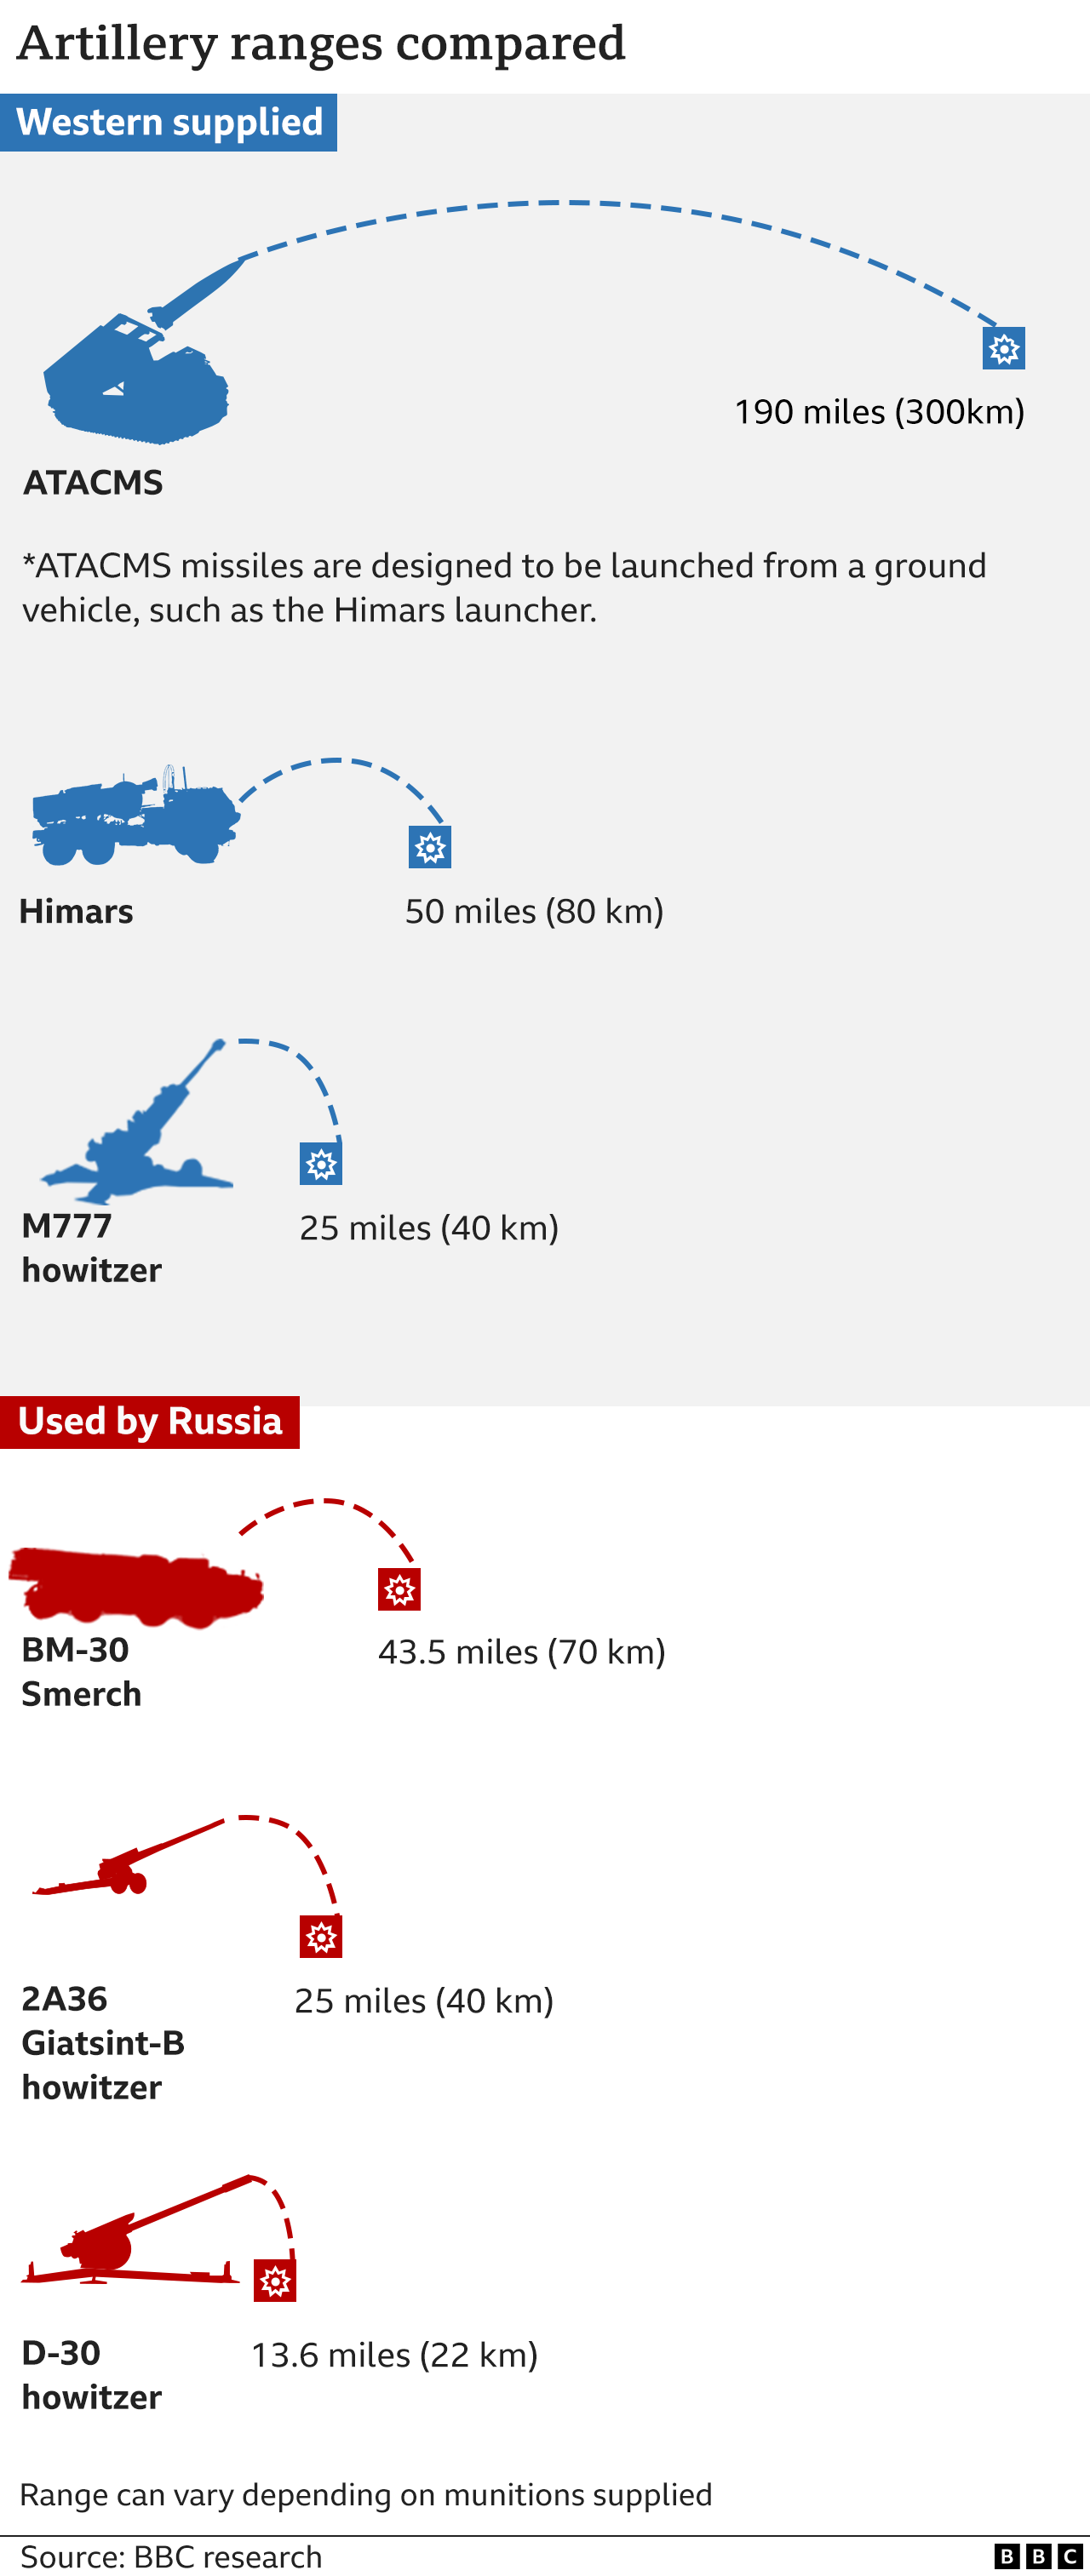 Graphic showing ranges of artillery systems used by Russia and Ukraine